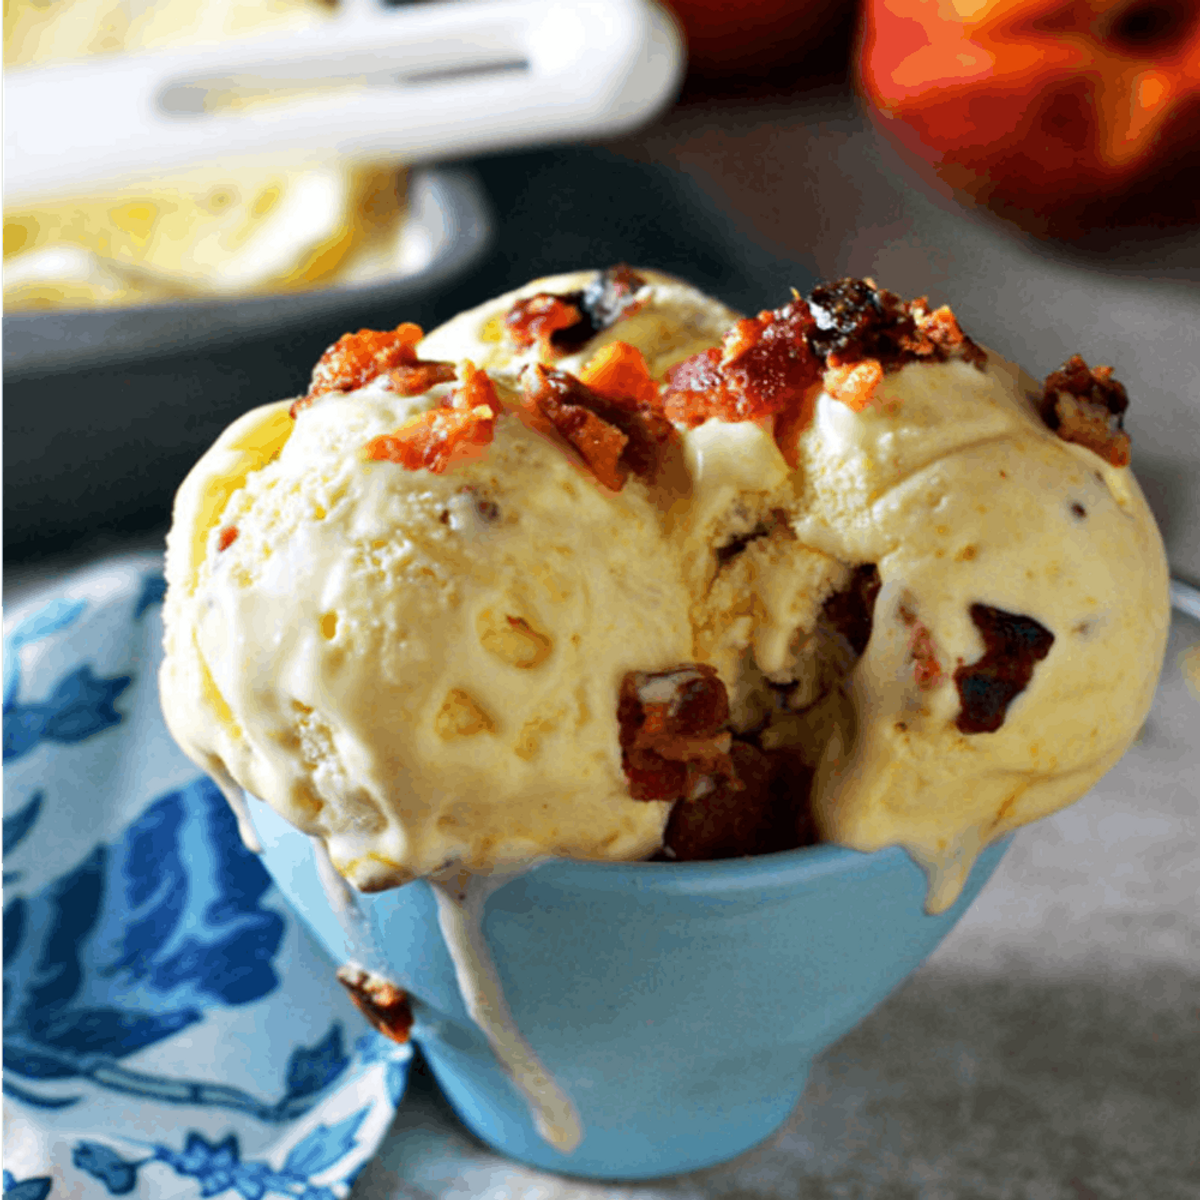 20 Savory Ice Cream Flavors That Instantly Made Us Drool